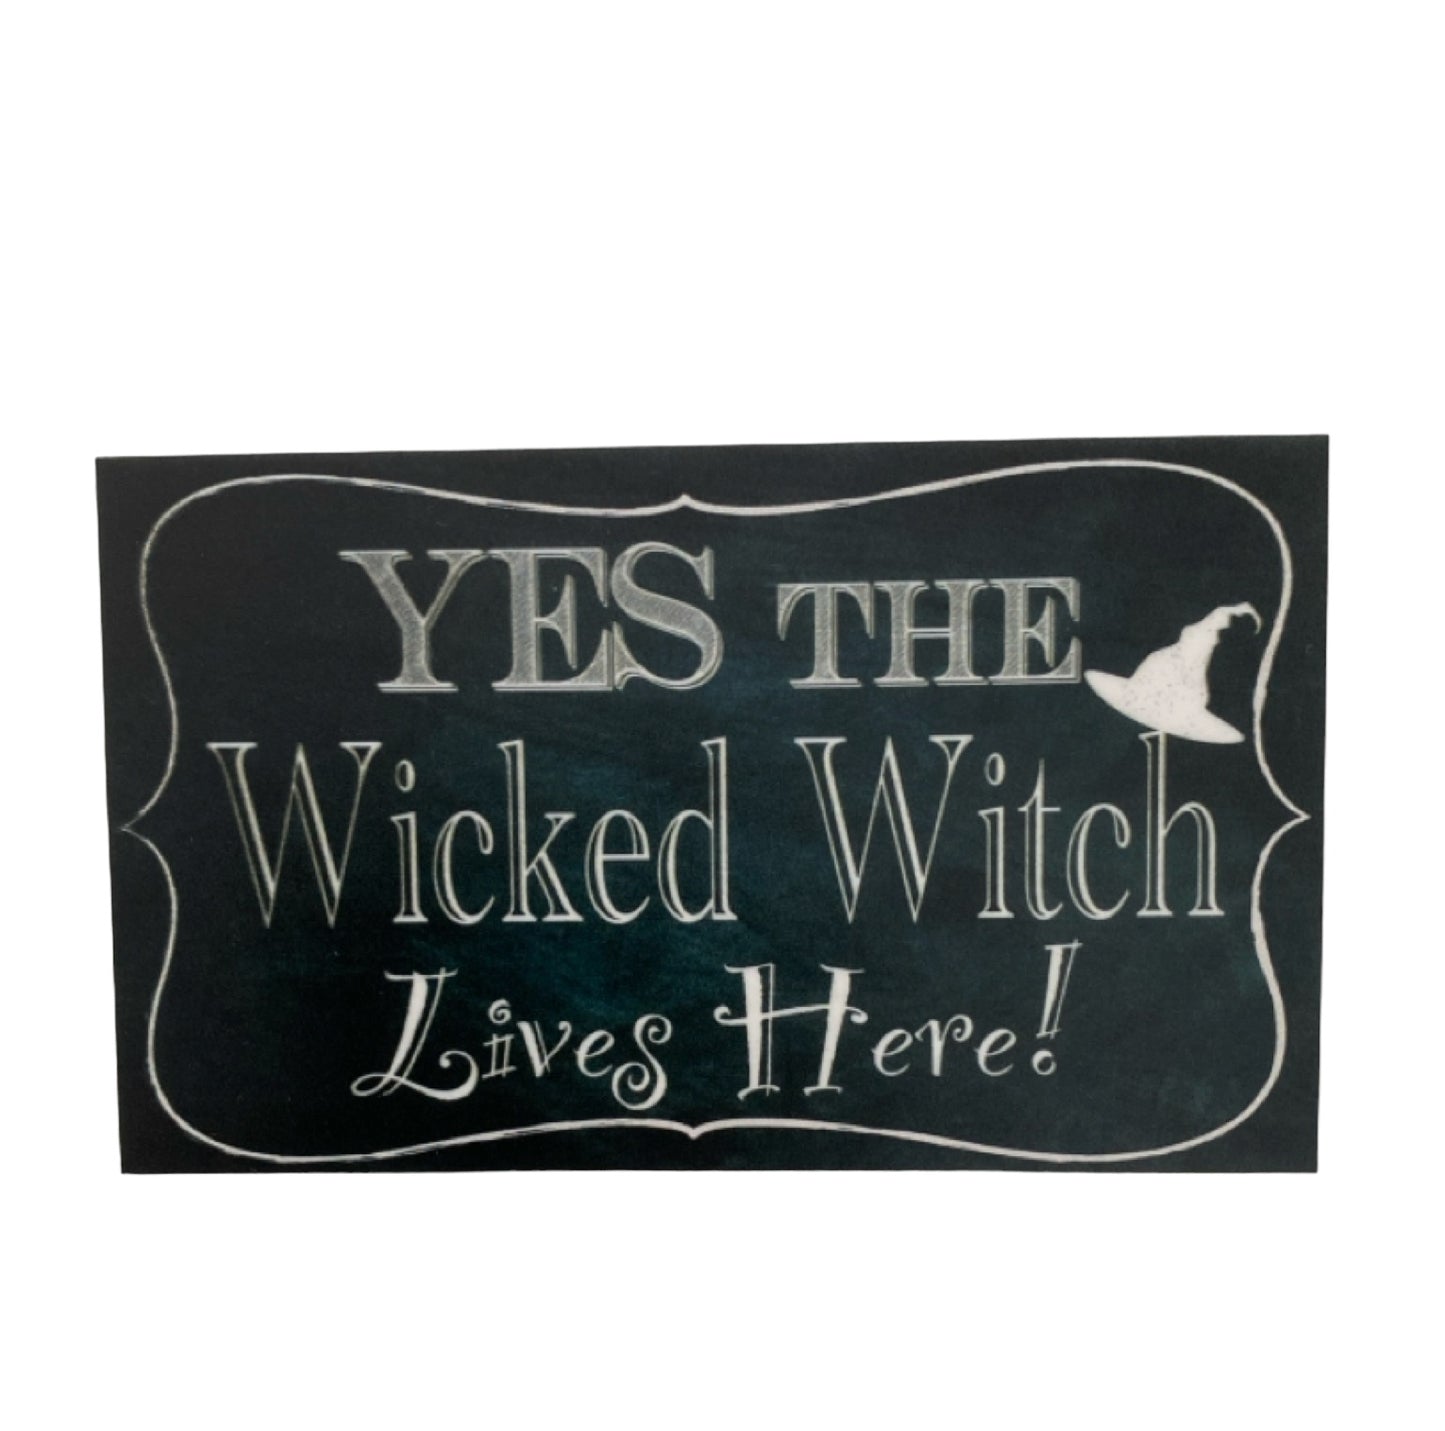 Yes Wicked Witch Lives Here Vintage Sign - The Renmy Store Homewares & Gifts 